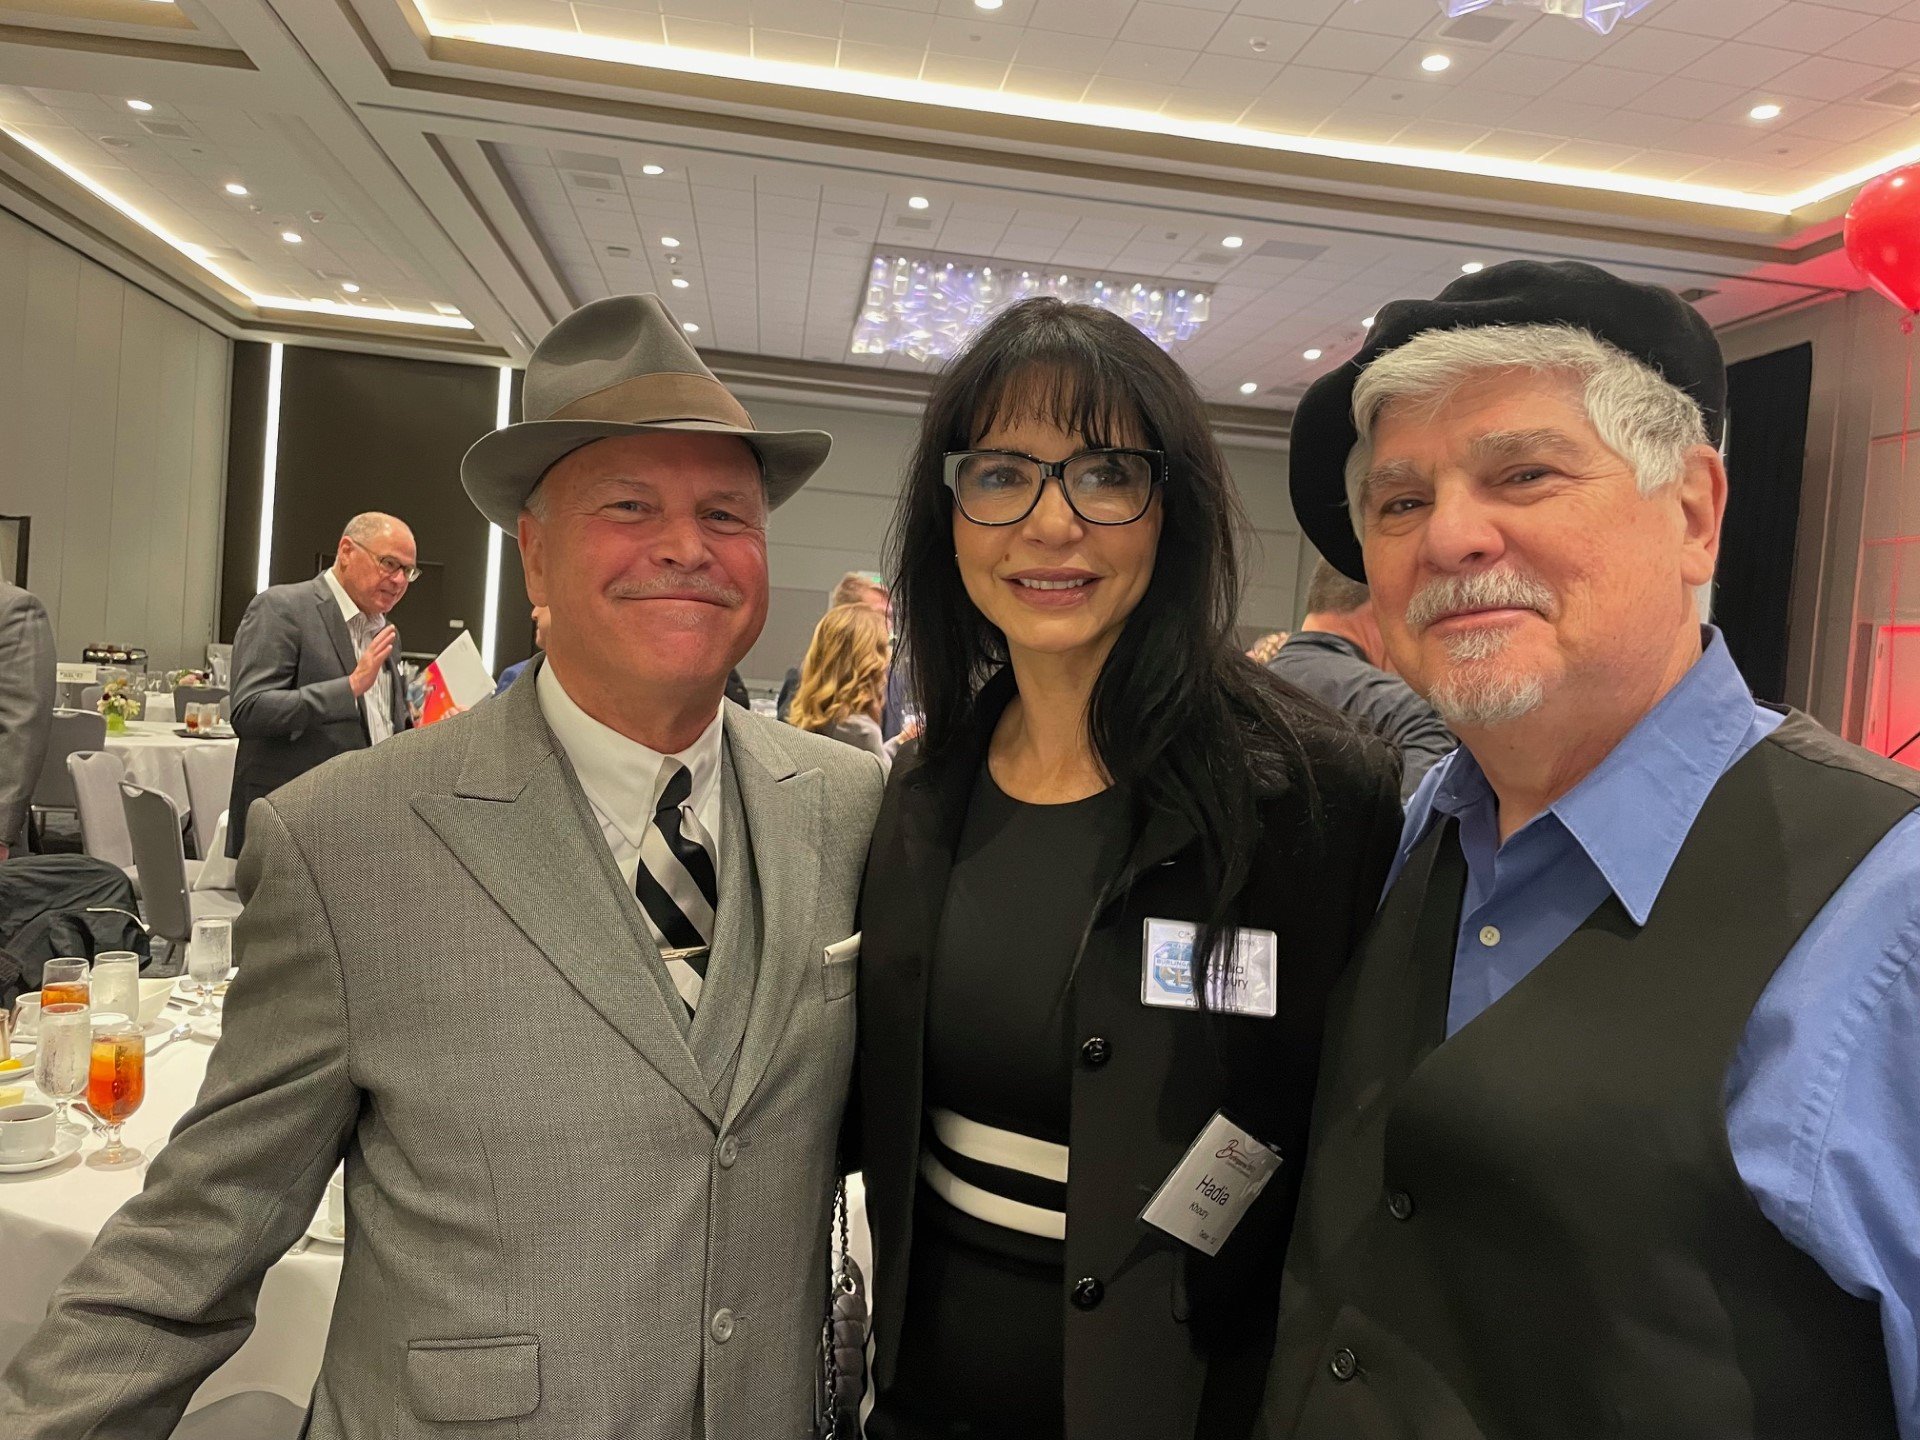 Ross Bruce, Chamber Board Chair and AVR Realty, Hadia Khoury, Beautification Commissioner, Humberto Berenfus, Jewels of Monaco